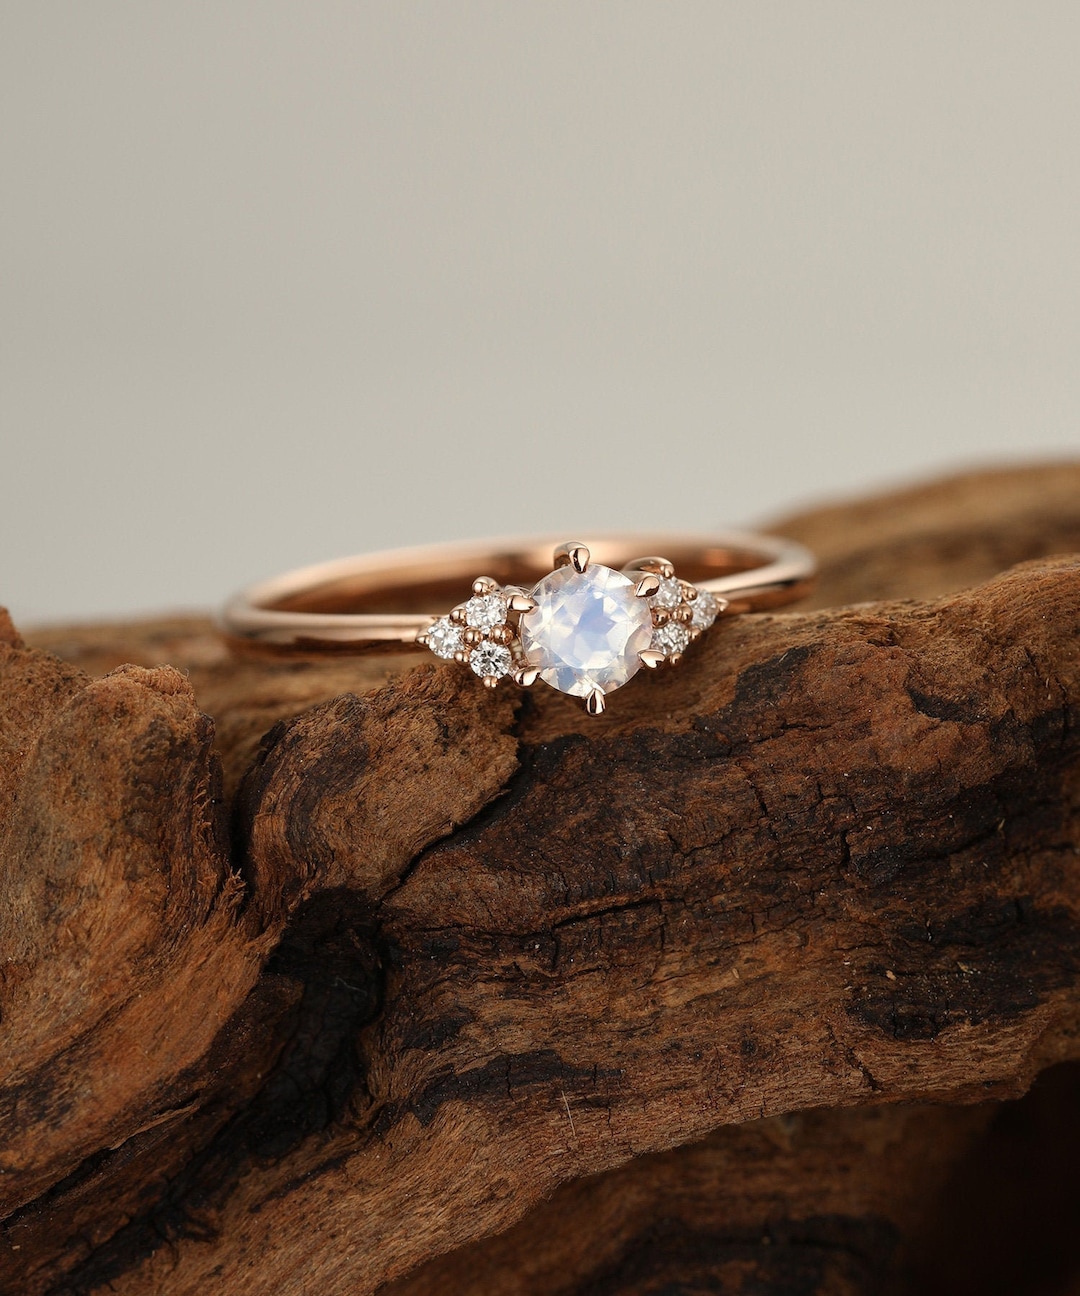 Moonstone Engagement Ring Vintage Lotus Flower Two Row Ring Diamond Twisted Ring Rose Gold Unique Floral Bridal Promise Anniversary Ring 18K +